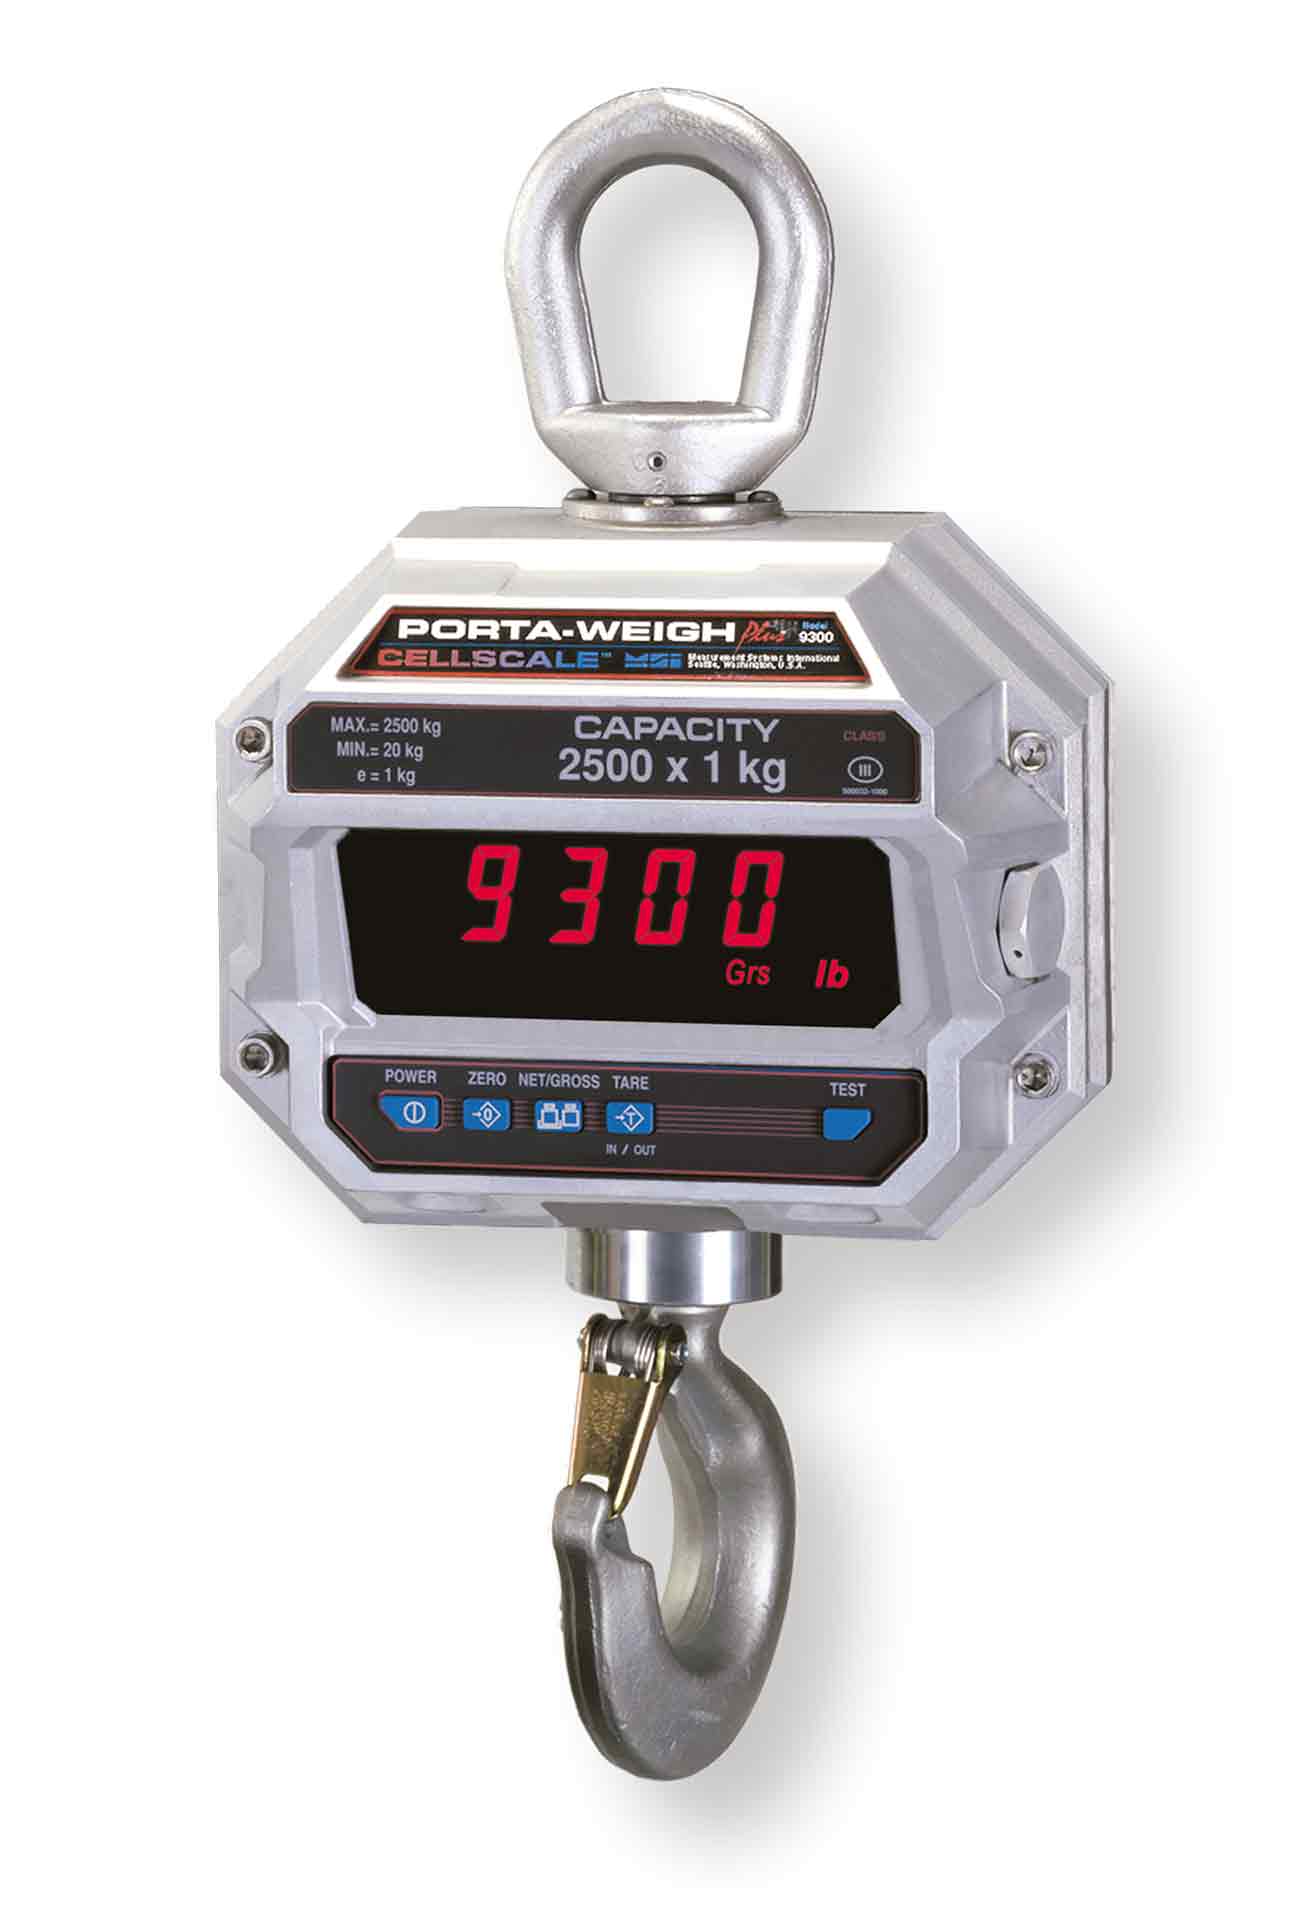 Rice Lake 138706 5000 Lb, MSI-9300 Port-A-Weigh Plus RF Crane Scale with 1 year Warranty